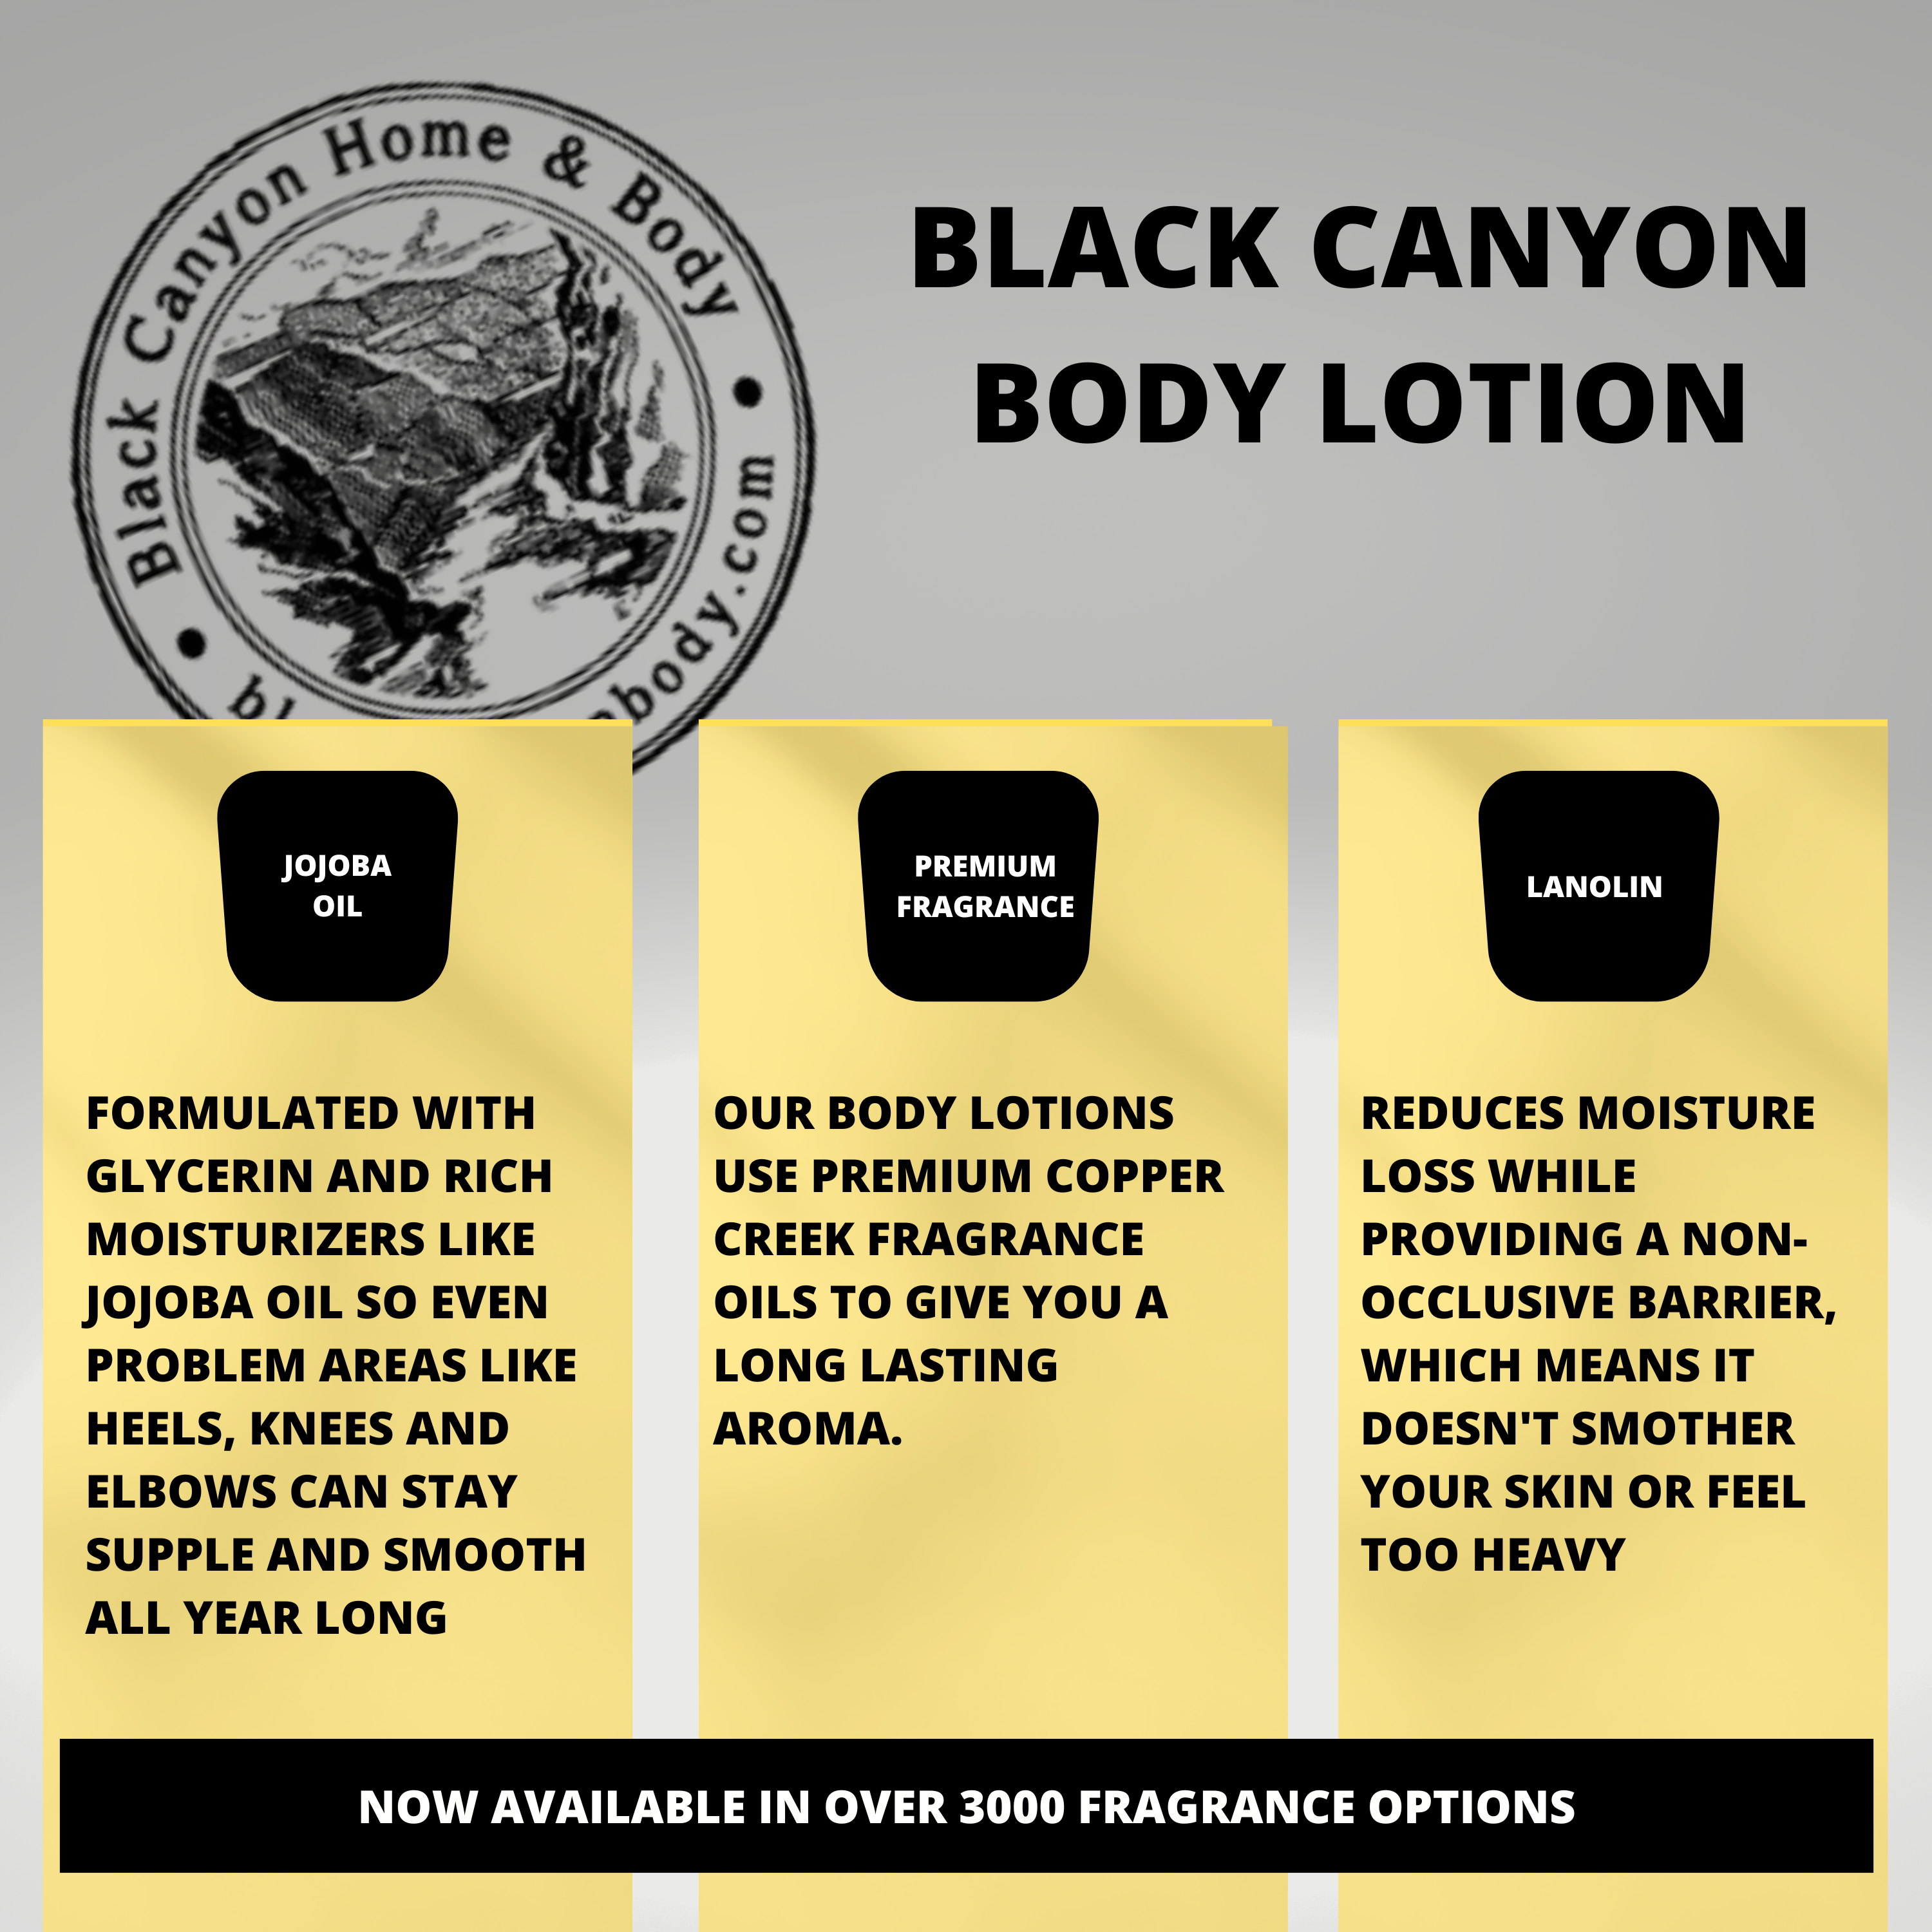 Black Canyon Cranberry Scented Luxury Body Lotion with Lanolin and Jojoba Oil